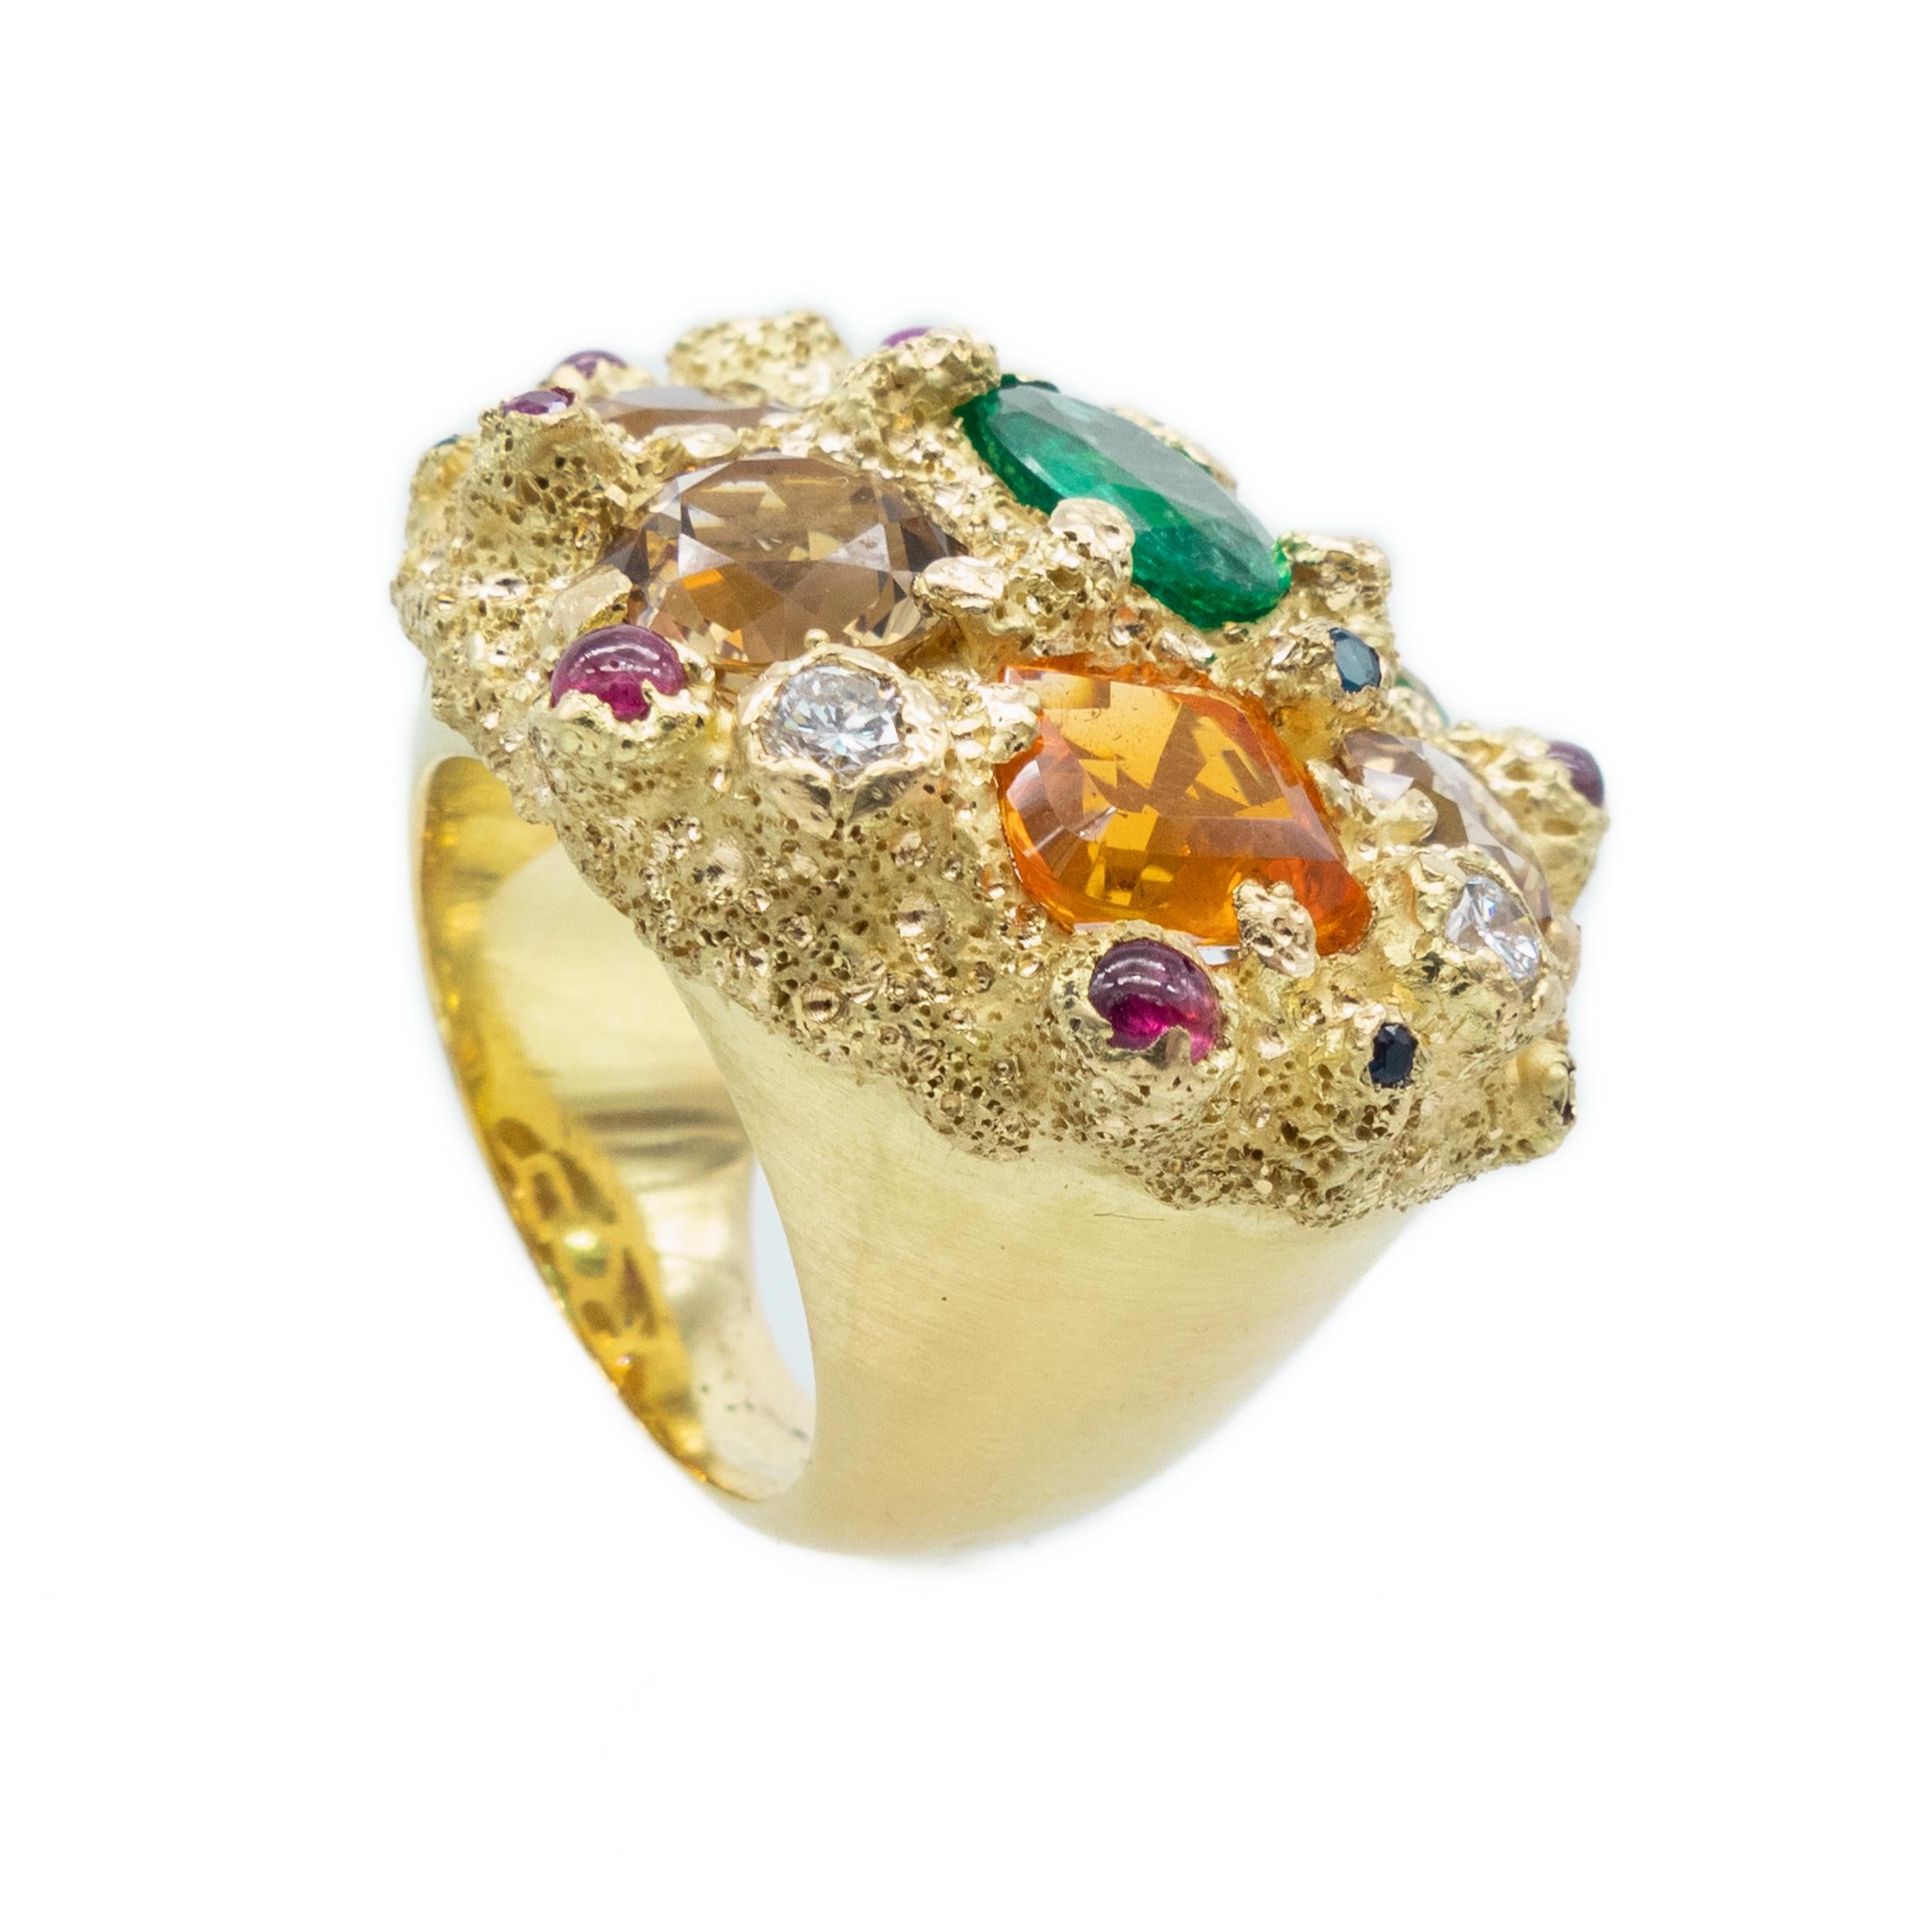 Yellow Gold Ring Emerald Beryl Champagne Peridot Mint Fire Opal Rubies Diamonds

Introducing our magnificent Galaxy ring, a true marvel of celestial beauty and craftsmanship. Part of our esteemed Galaxy collection, this ring holds a special place in